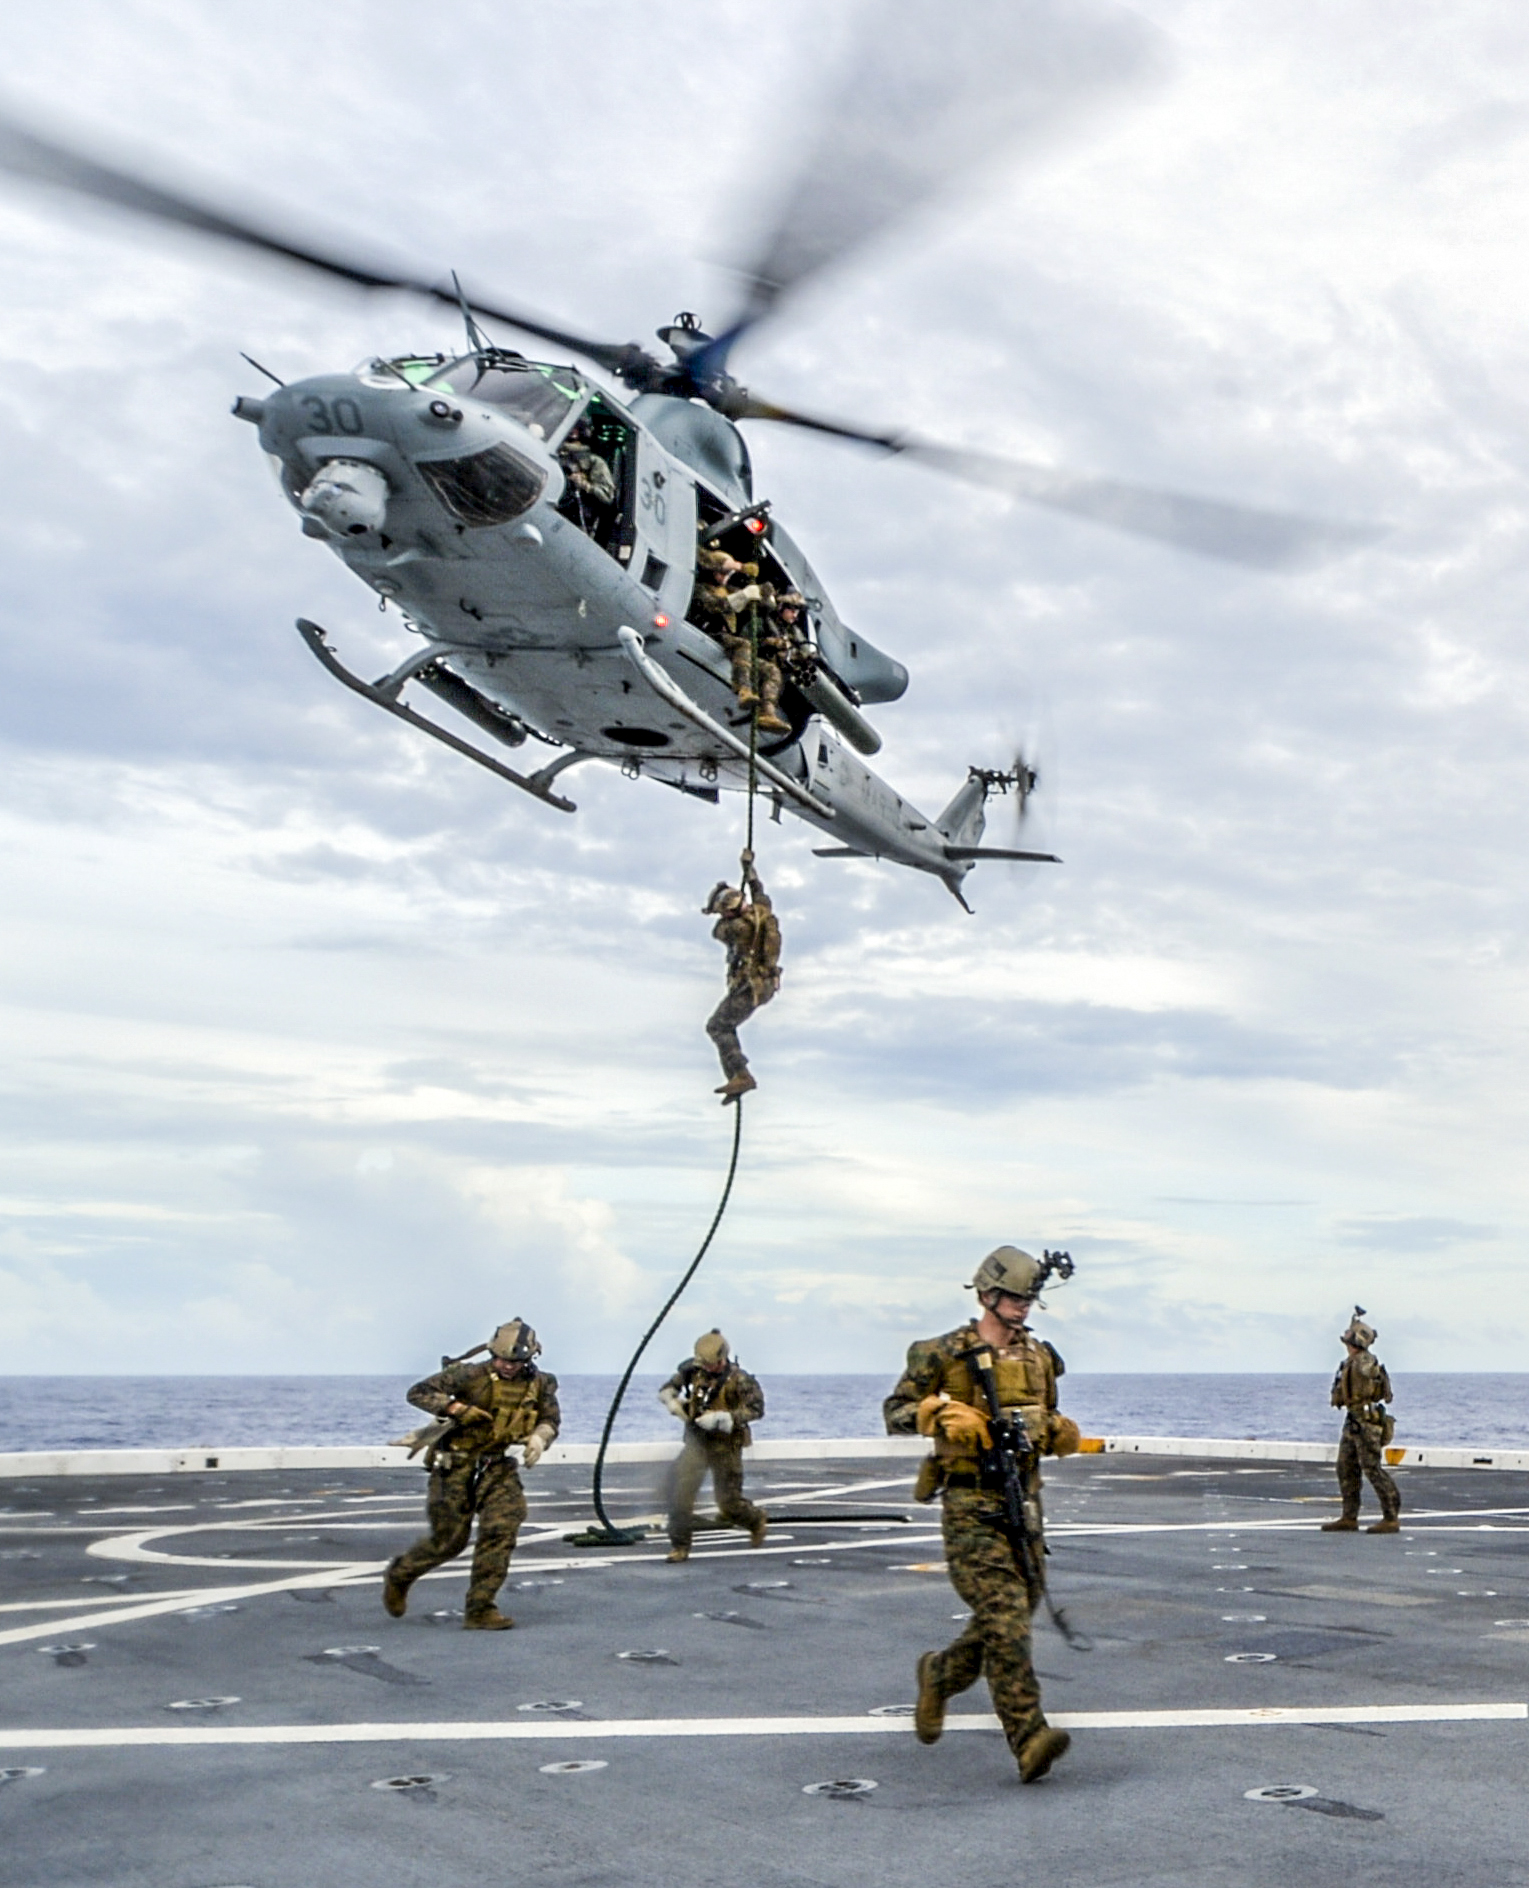 Navy Petty Officer 2nd Class Ramiro Alvarez directs a UH-1 Huey helicopter as Marines repel during fast-rope training aboard the USS Somerset in the Pacific Ocean.